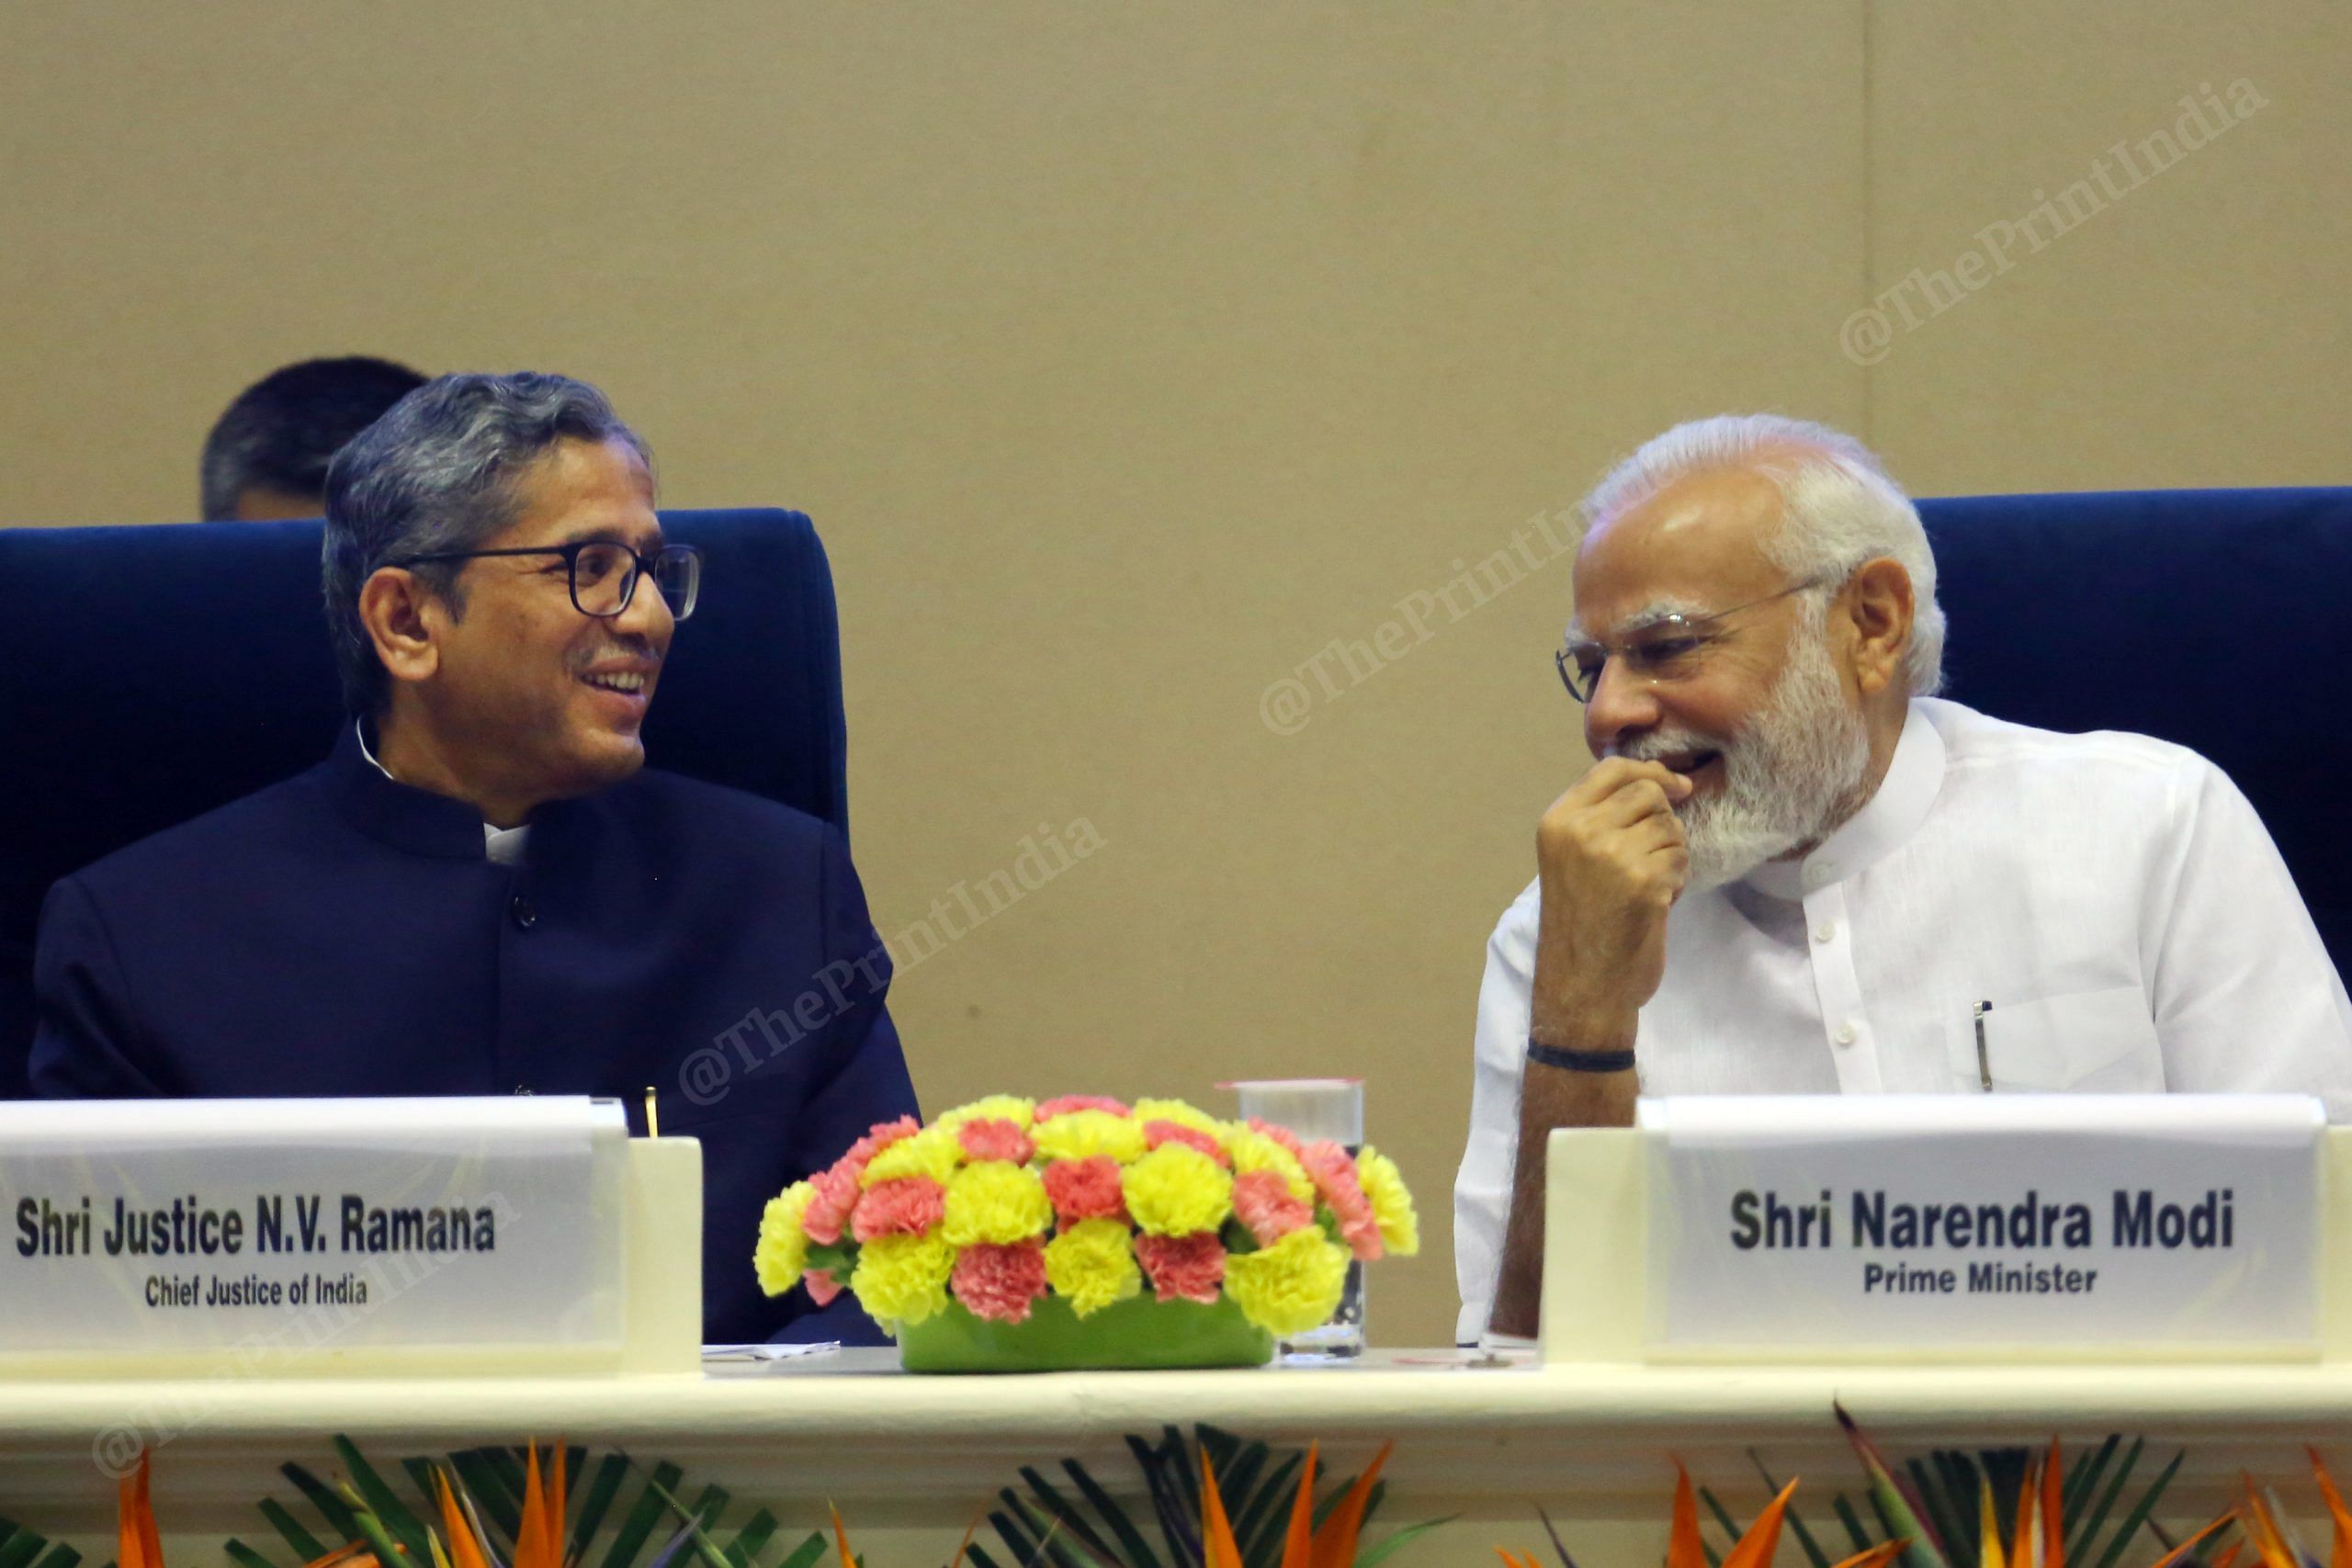 Prime Minister Narendra Modi with Chief Justice of India N.V. Ramana during the inaugural session of First All India District Legal Services Authorities Meet, at Vigyan Bhawan in New Delhi | Praveen Jain | ThePrint